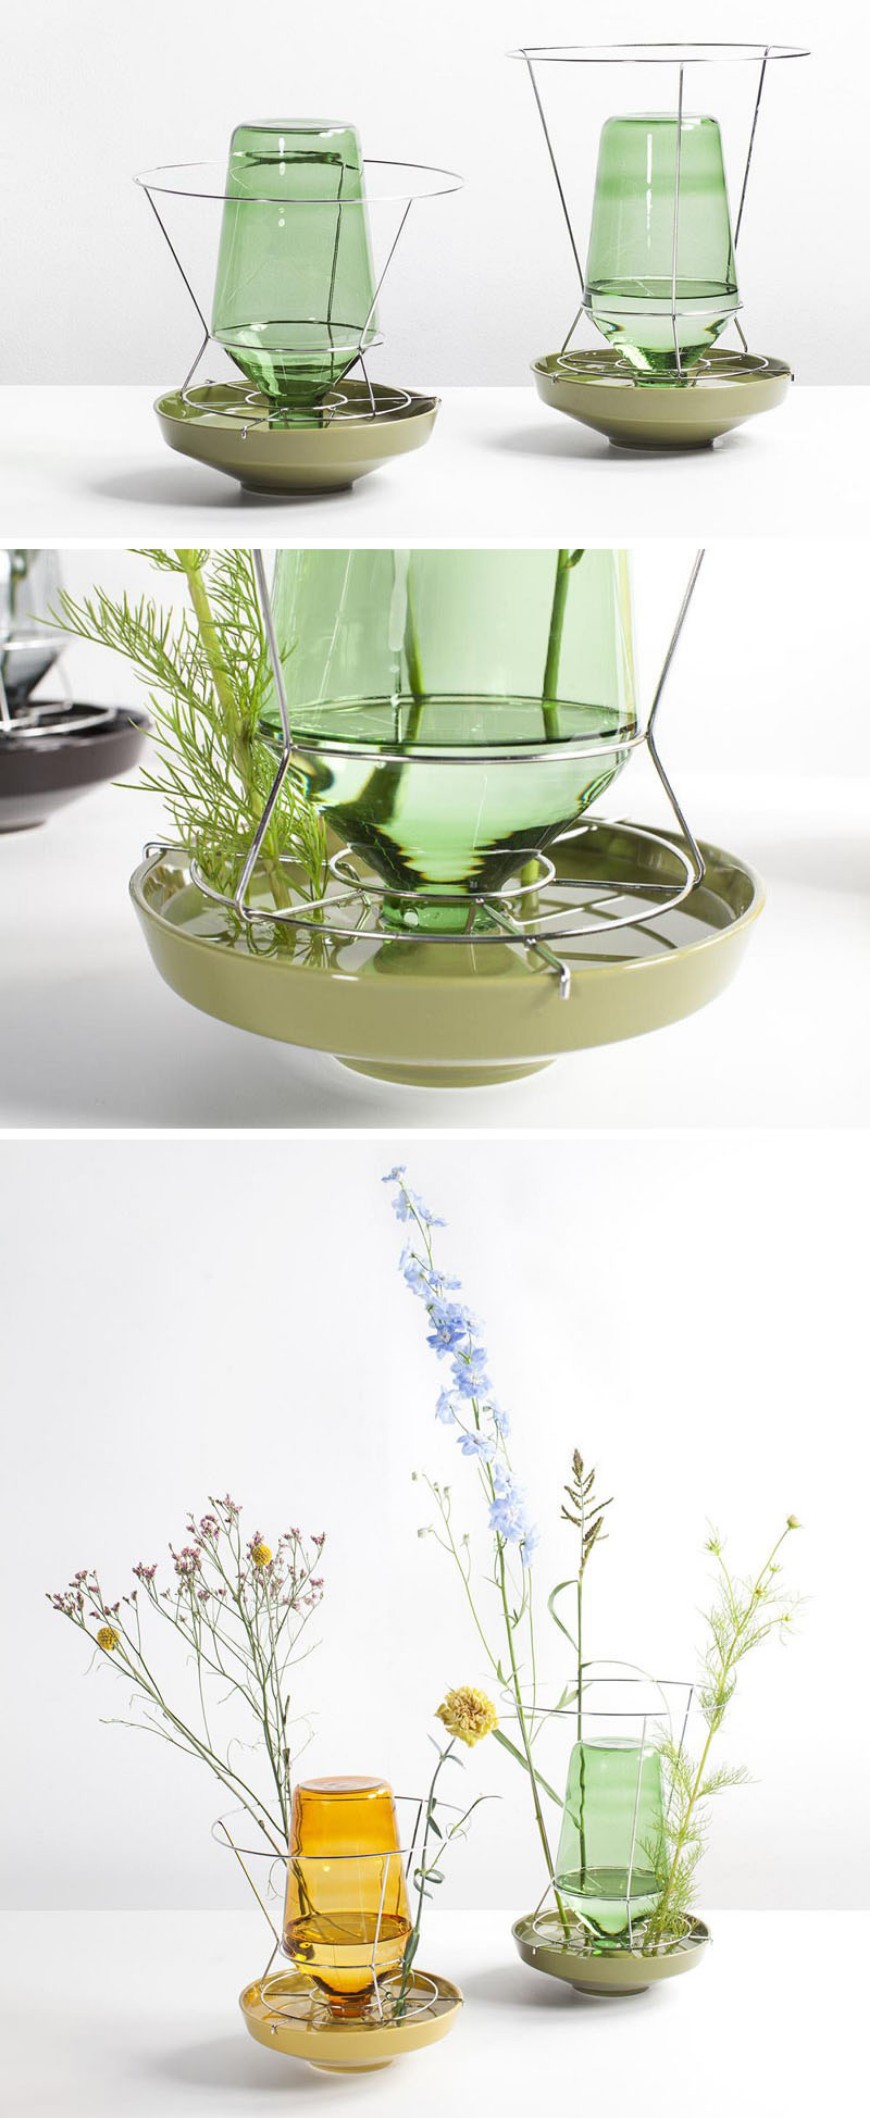 Find These Colorful Glass Vases For Your Home Decor (3)